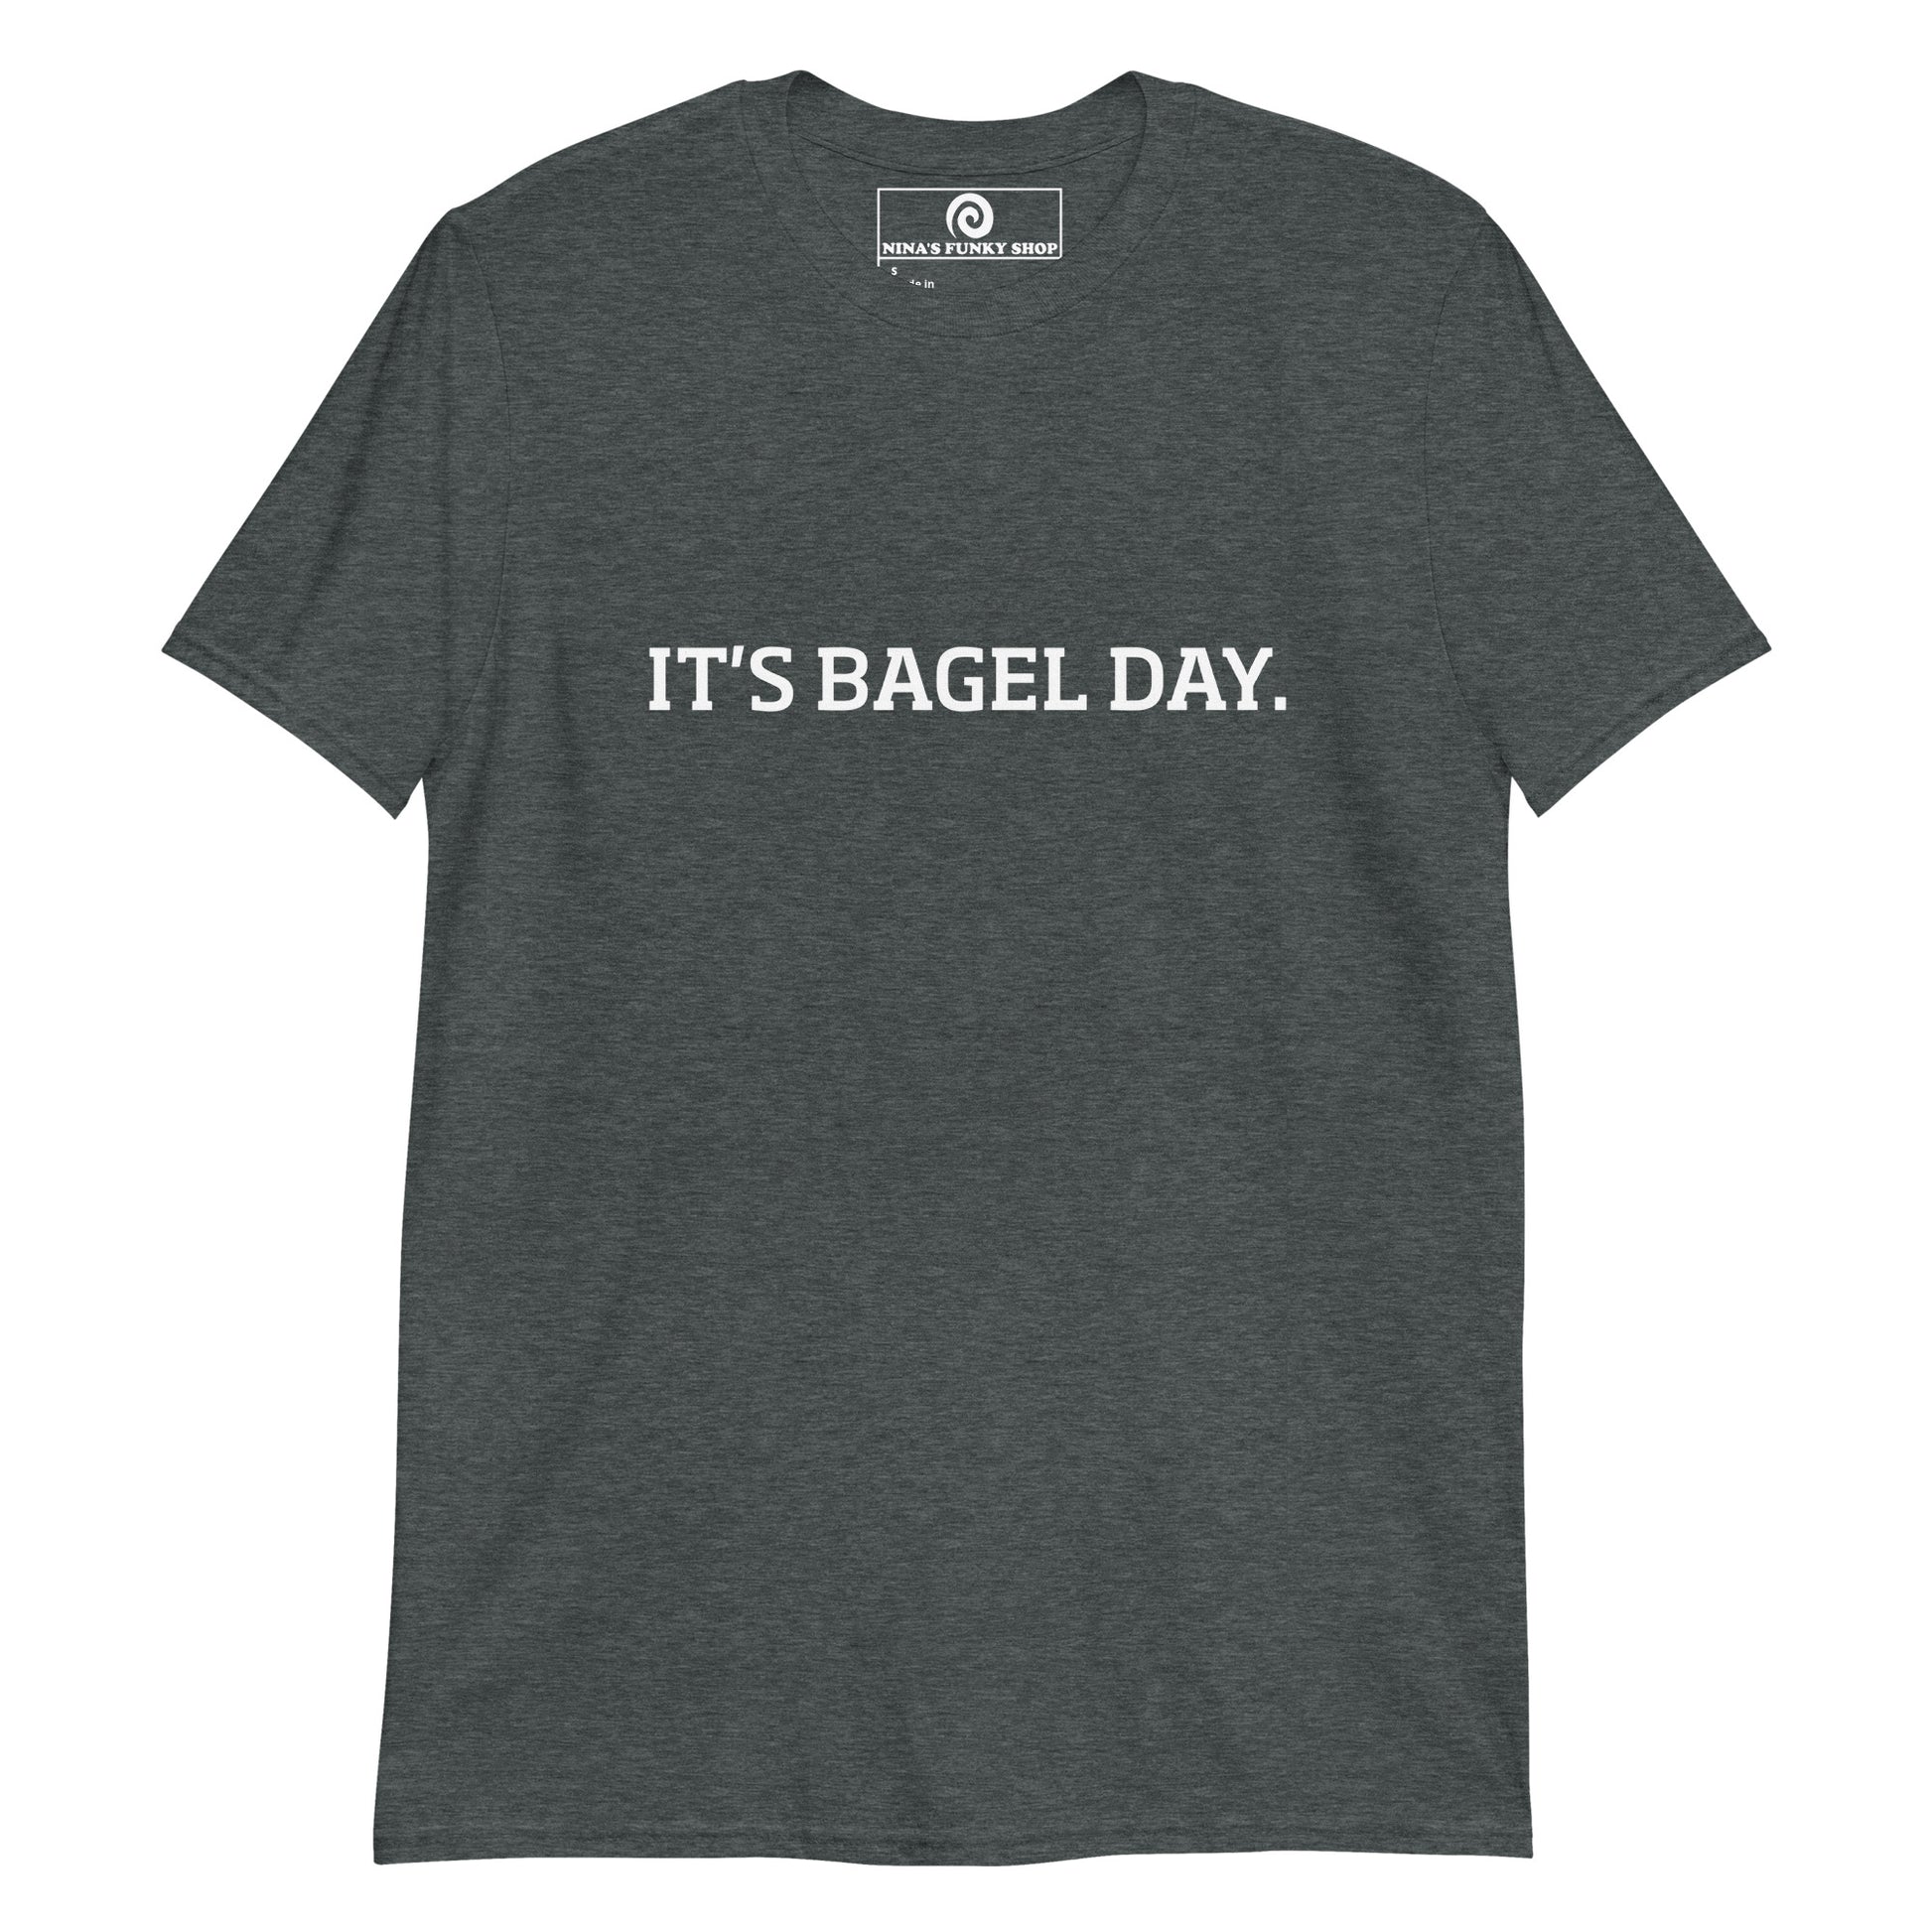 Dark Gray Bagel Day T-shirt - Everyday is bagel day! Love bagels? Looking for a funny gift for a bagel enthusiast? This bagel day t-shirt is just what you need. It's soft and comfortable with a simple bagel saying design, expertly printed on the front. The perfect funny foodie shirt for bagel lovers. Designed by Nina and made just for you.